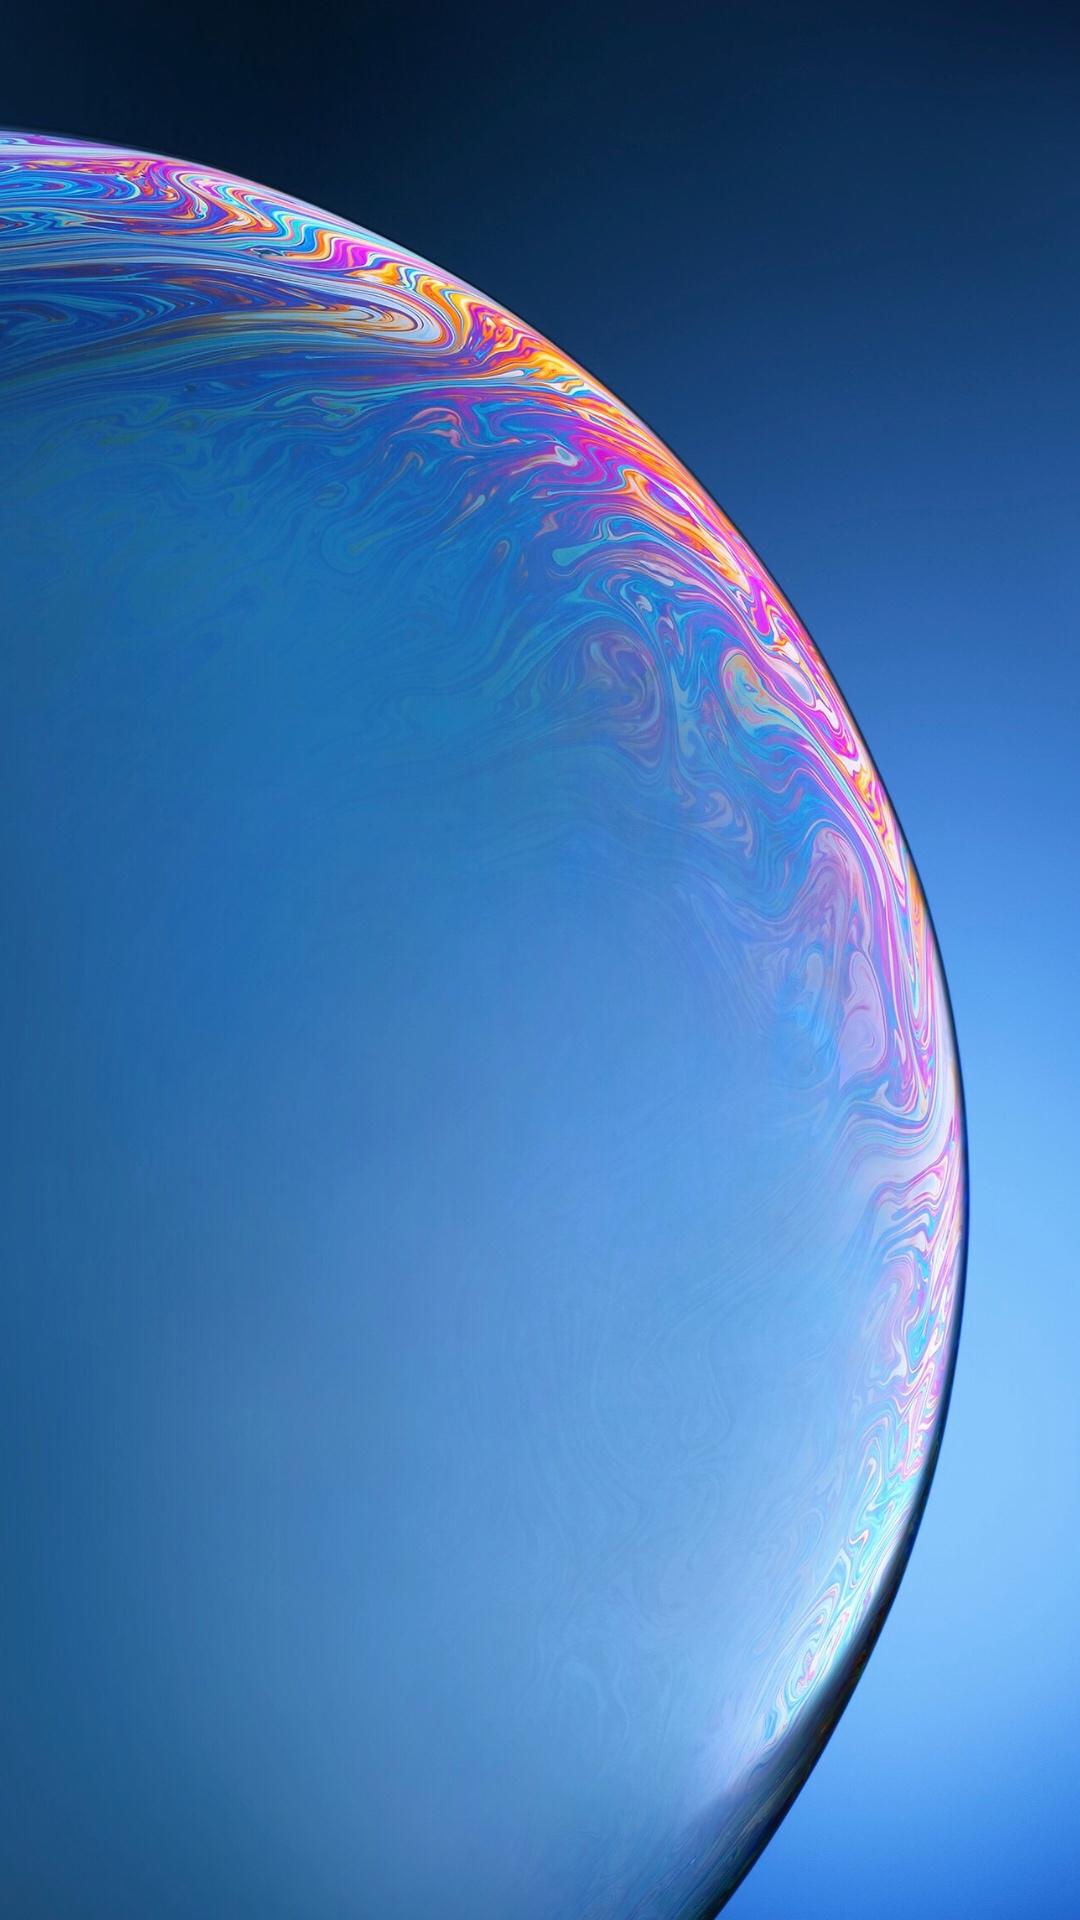 Check out these 15 beautiful iPhone XS and iPhone XR wallpaper